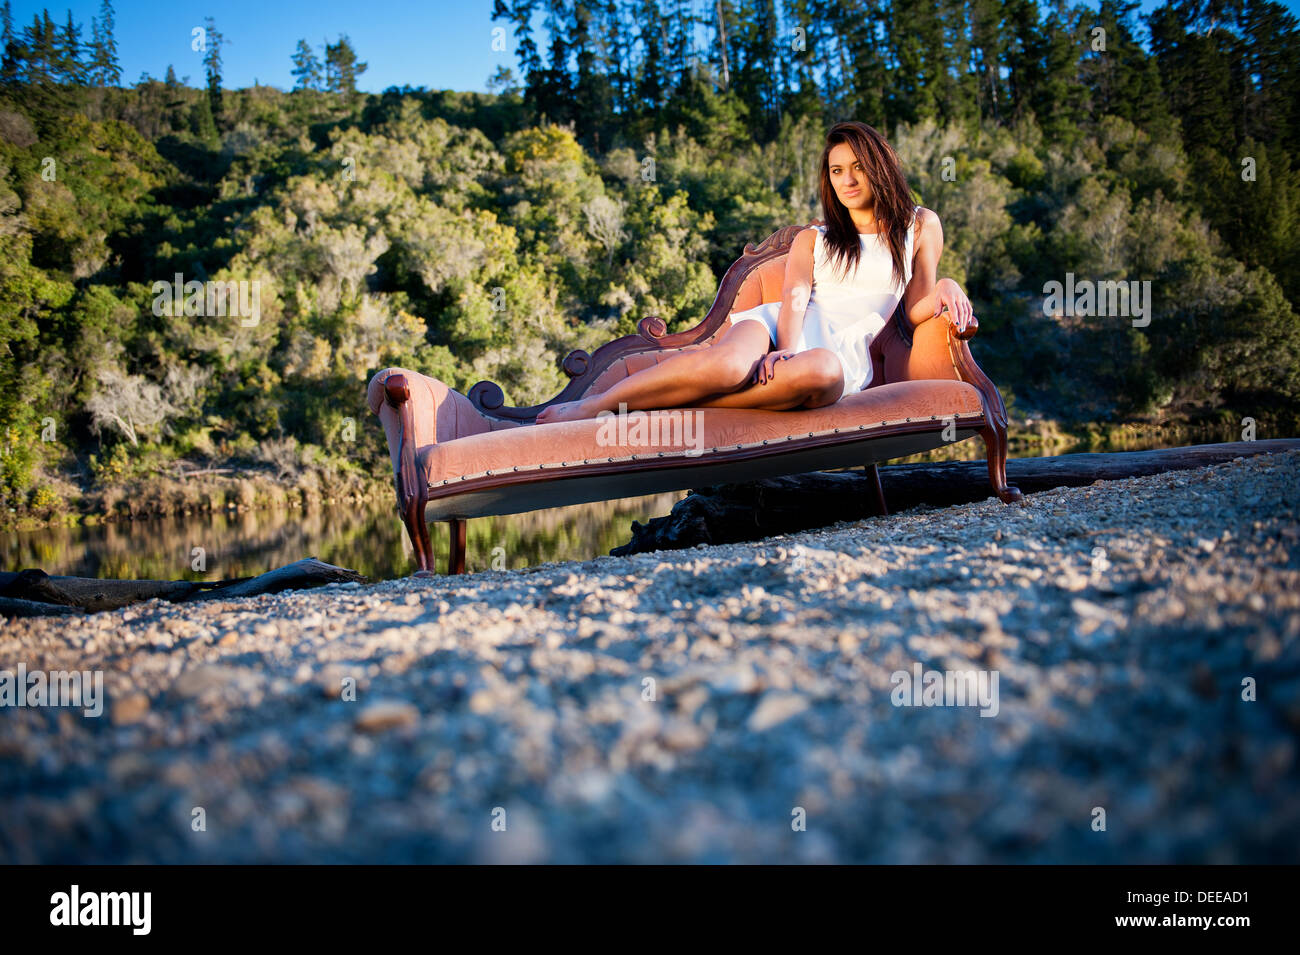 Attractive young Caucasian female model posing on a beautiful vintage couch outside a remote natural environment during sunset. Stock Photo